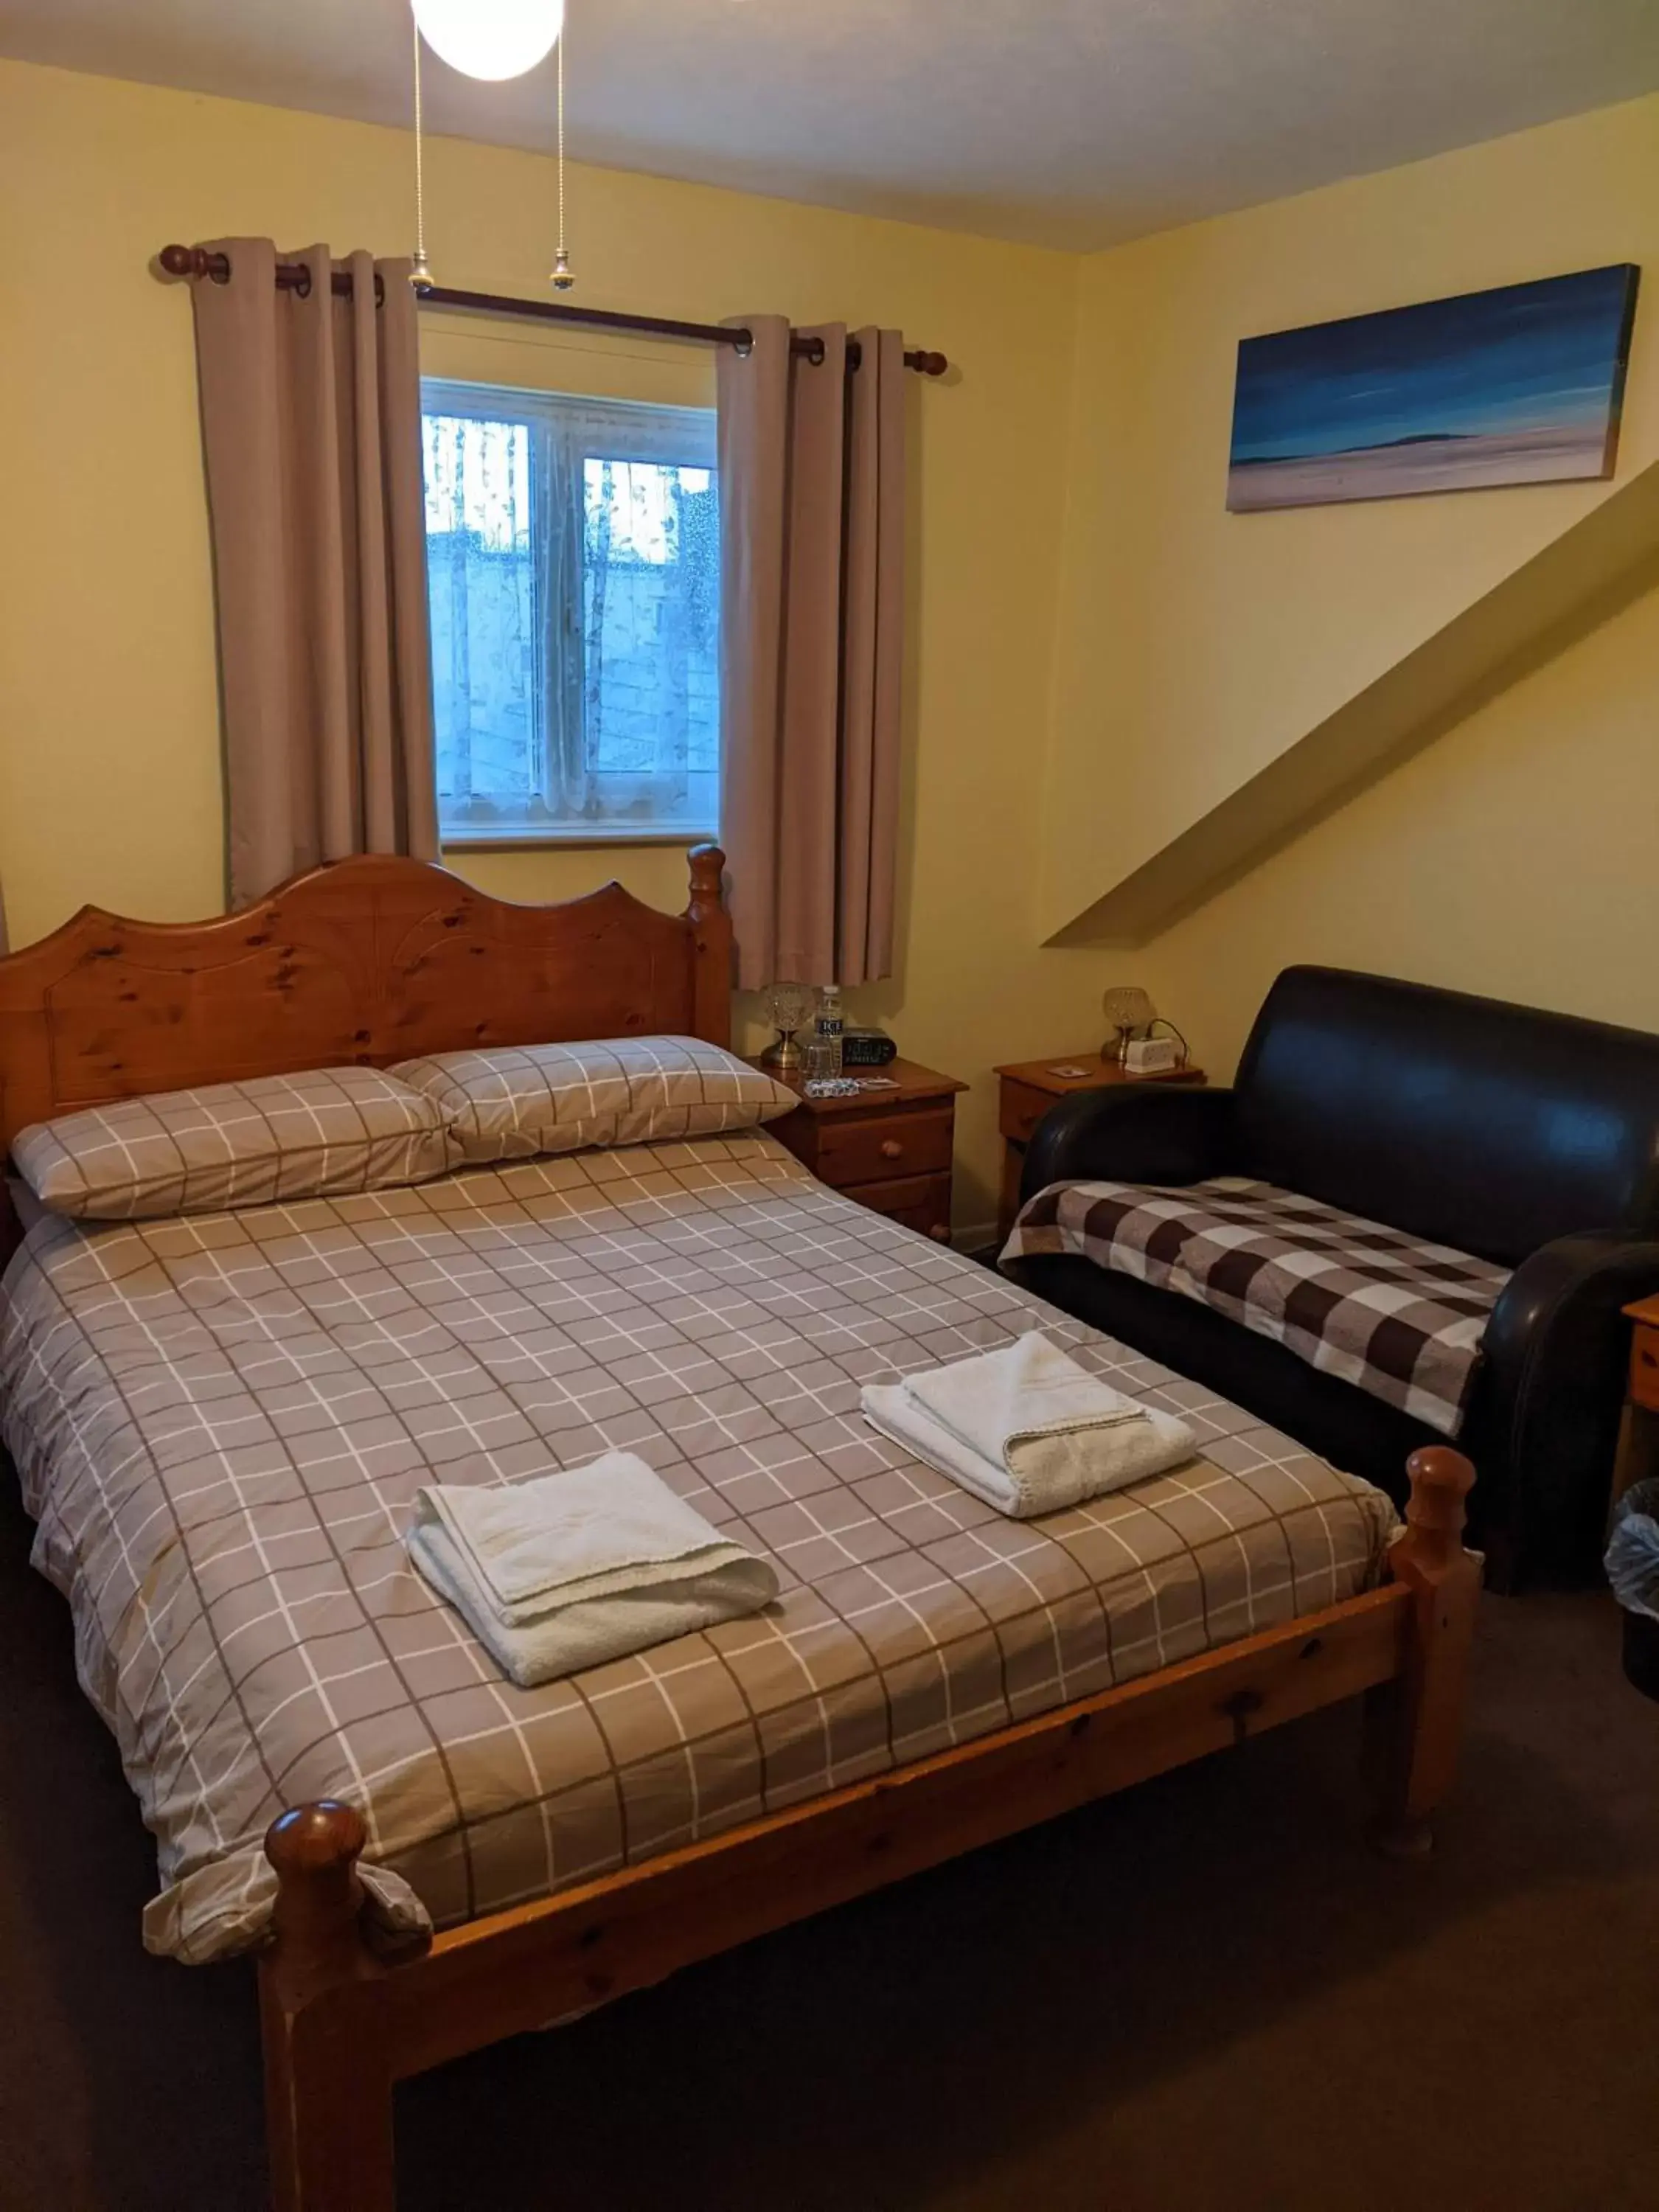 Bed in Kingswinford Guest House